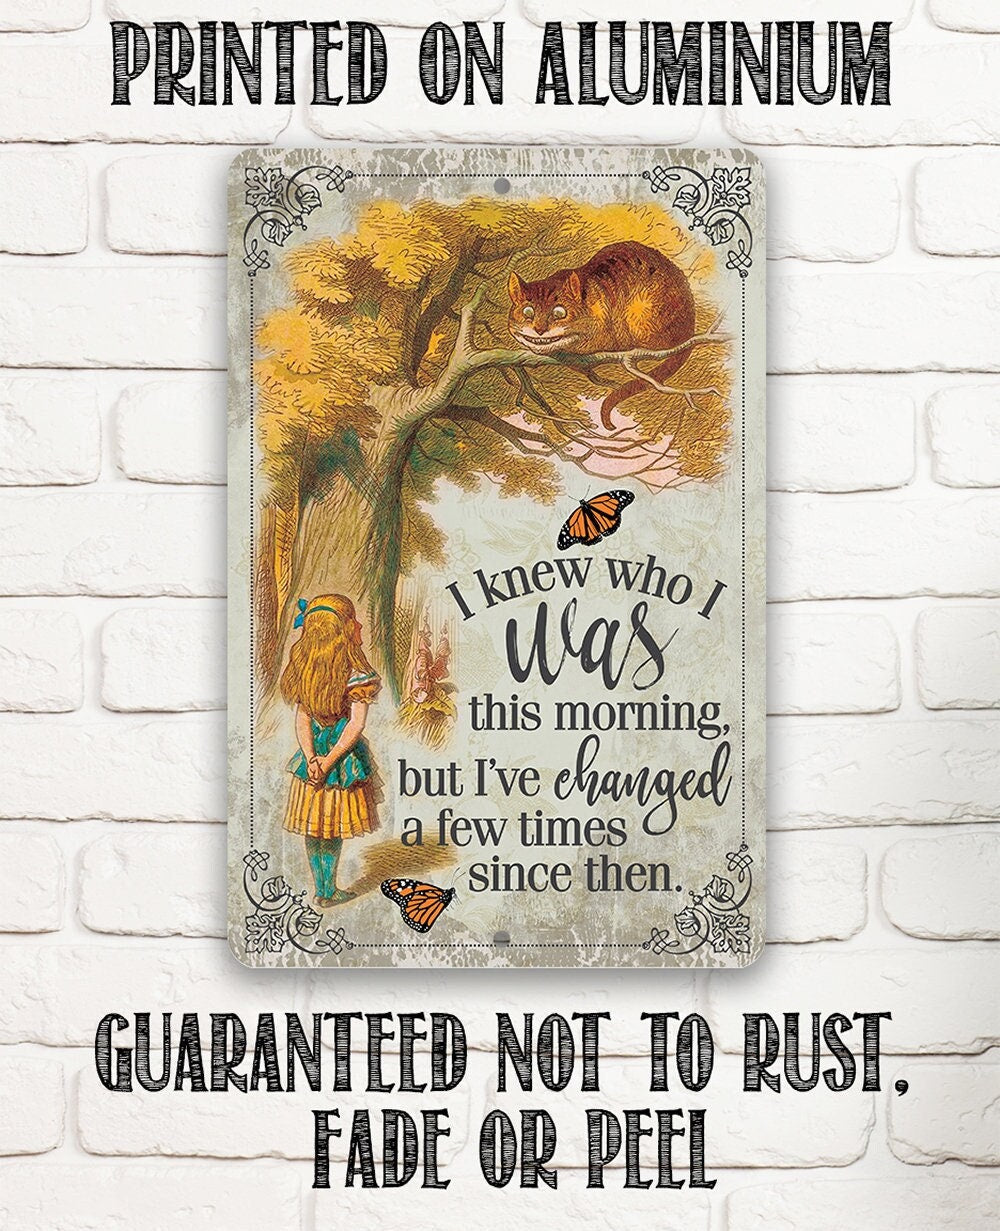 Alice in Wonderland - I Knew Who I Was This Morning - 8" x 12" or 12" x 18" Aluminum Tin Awesome Metal Poster Lone Star Art 